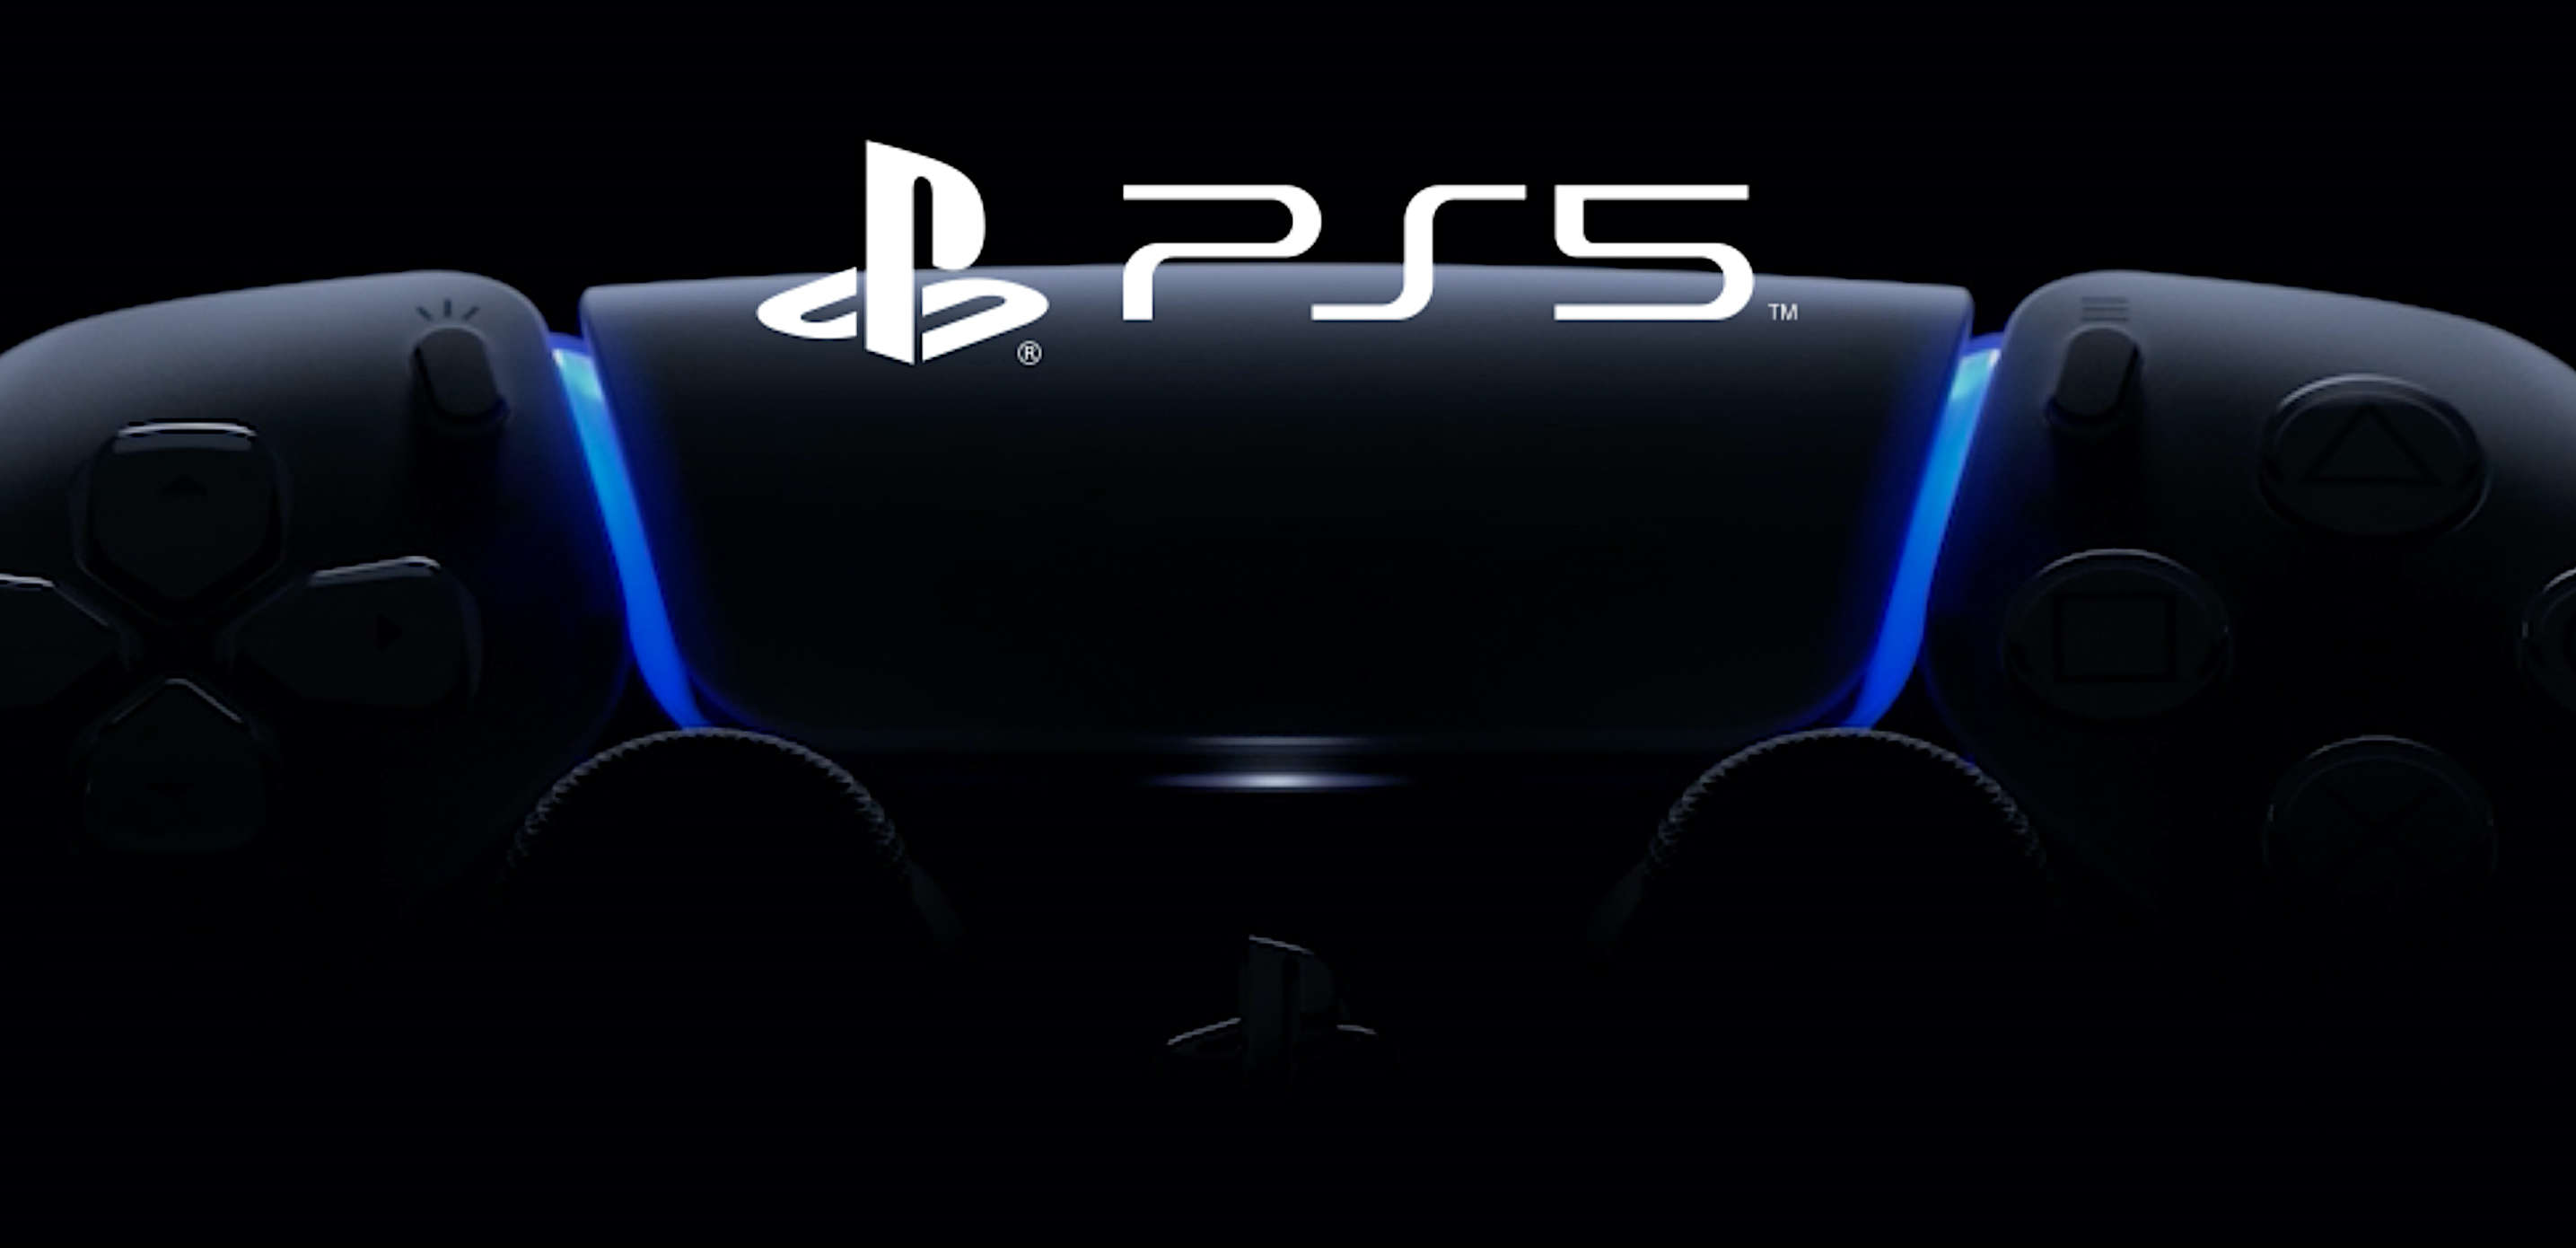 The PlayStation 5 controller and PS5 logo